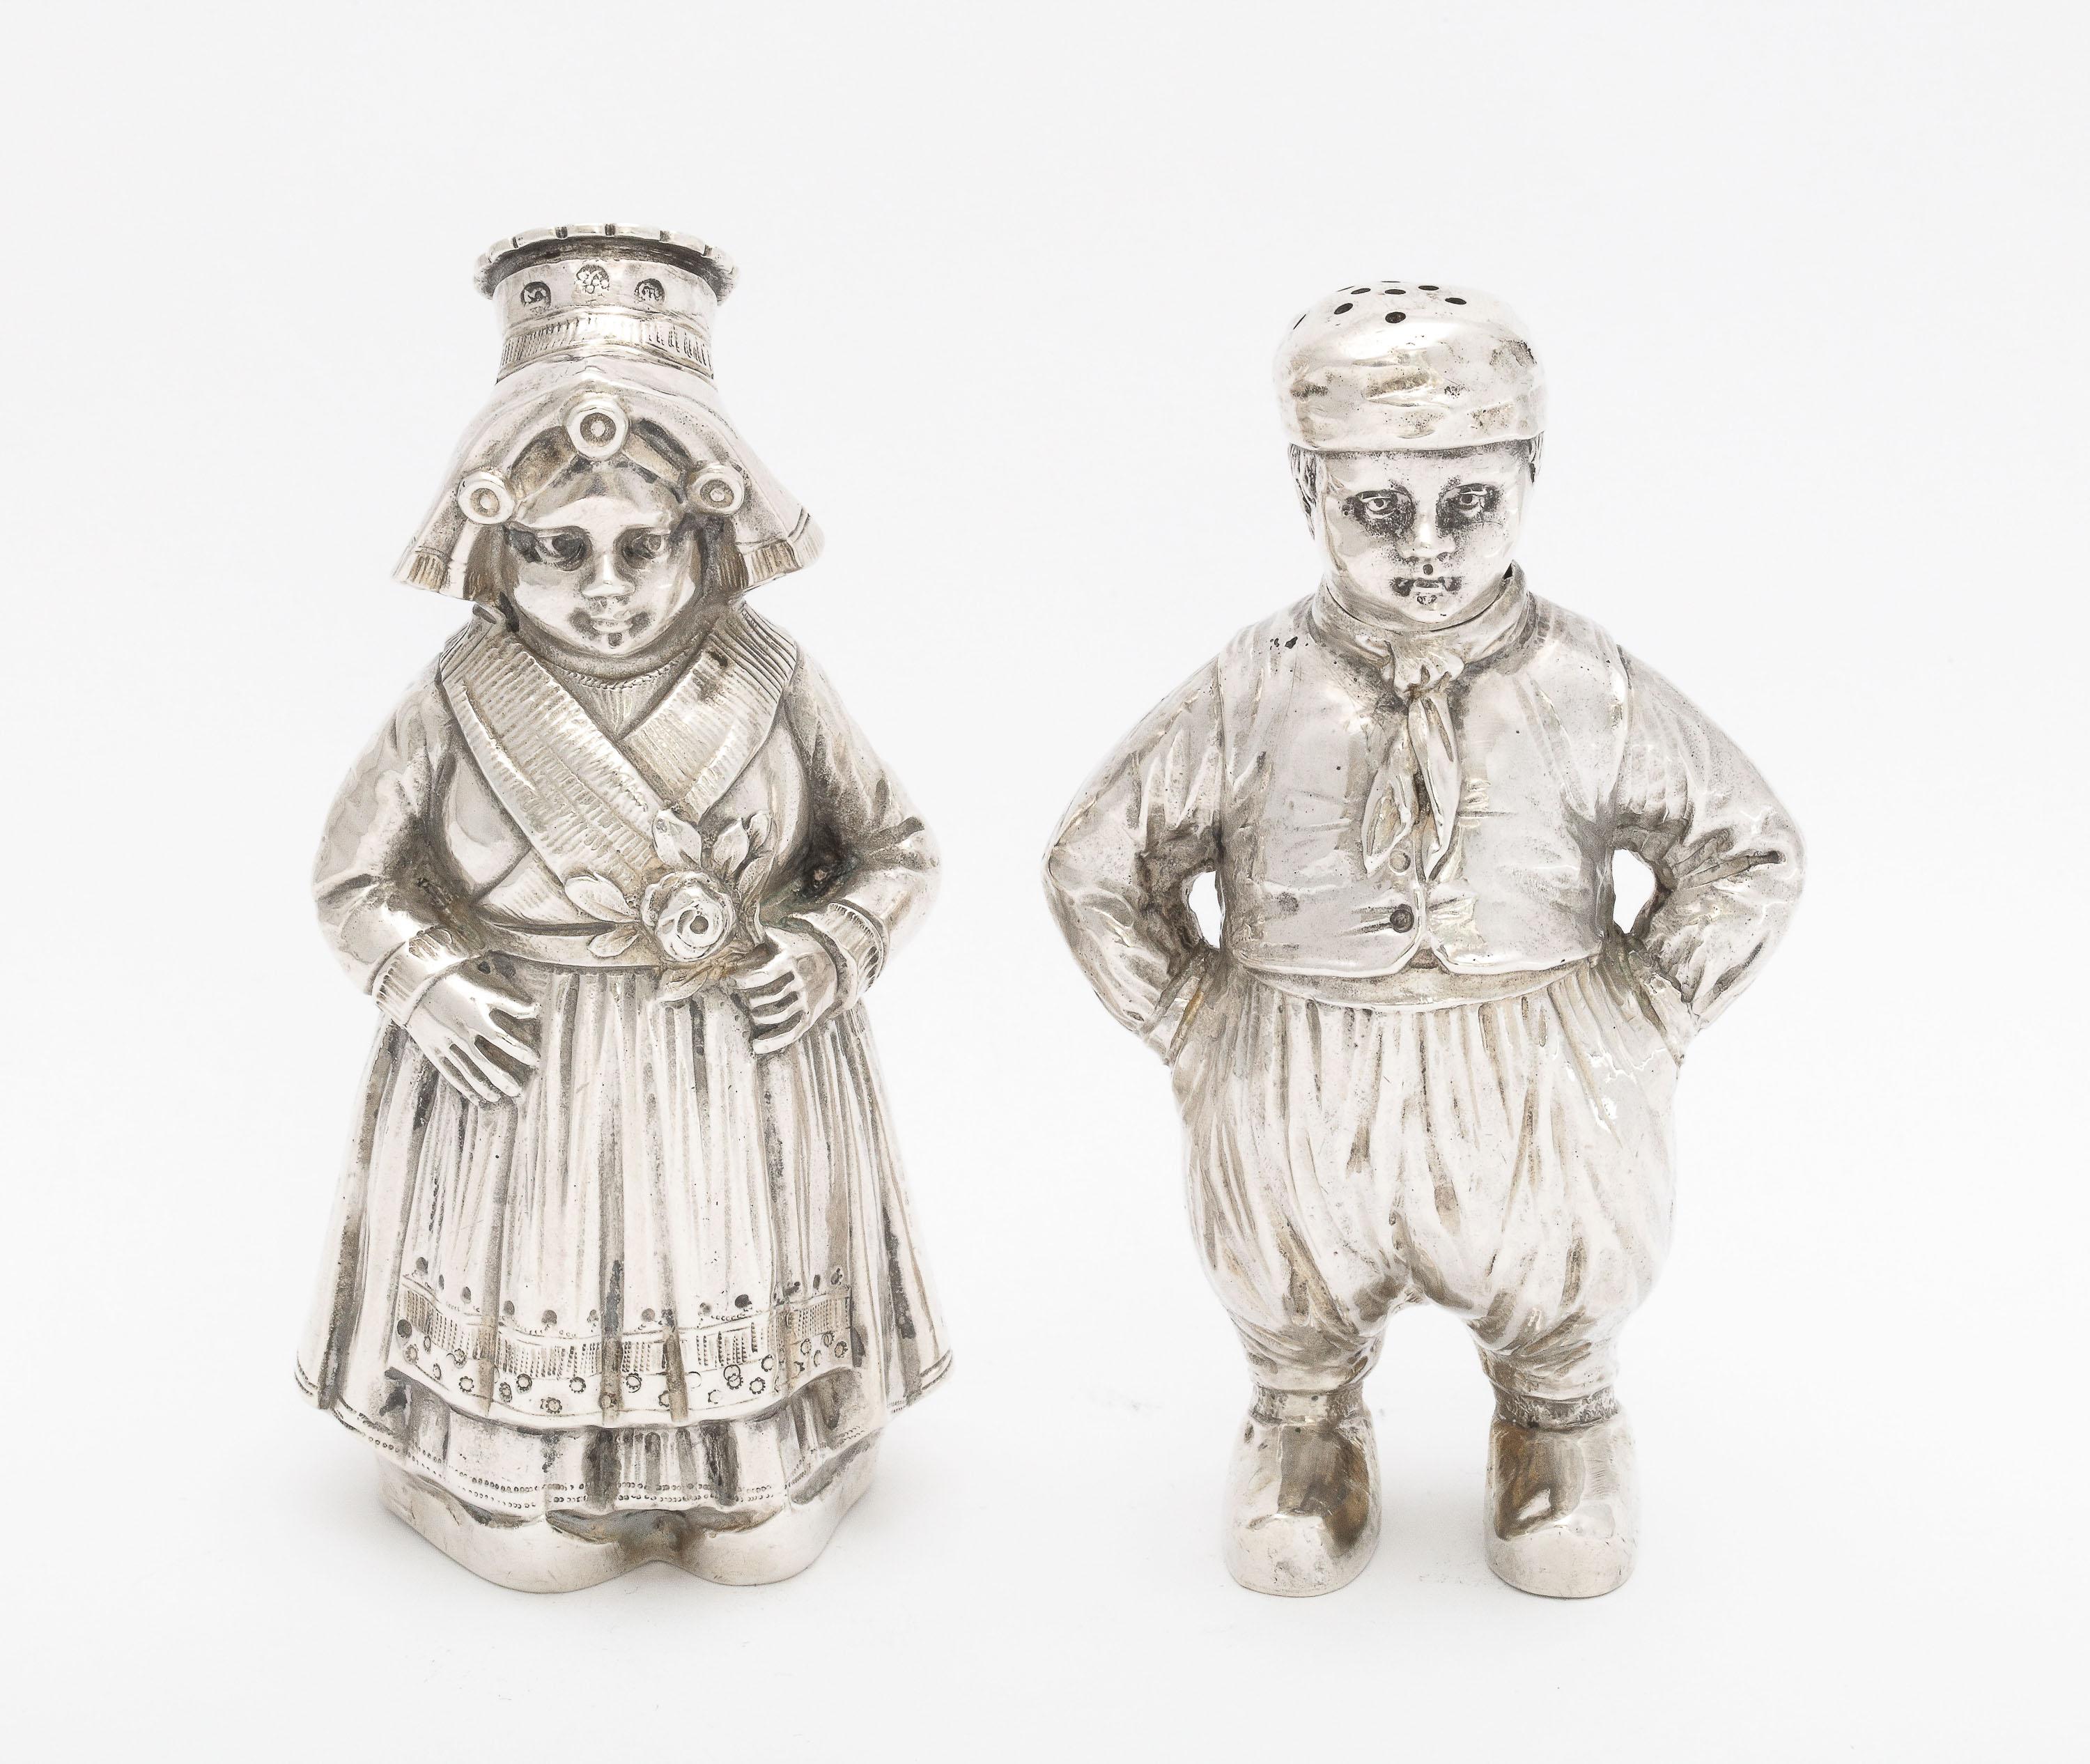 Pair of Edwardian Period, Continental Silver (.835) salt and pepper shakers in the form of a Dutch Girl and Boy, Austria, Ca. 1900. The removable, pierced hat of each shaker serves as the lid of that shaker. The closure is a bayonet closure. The